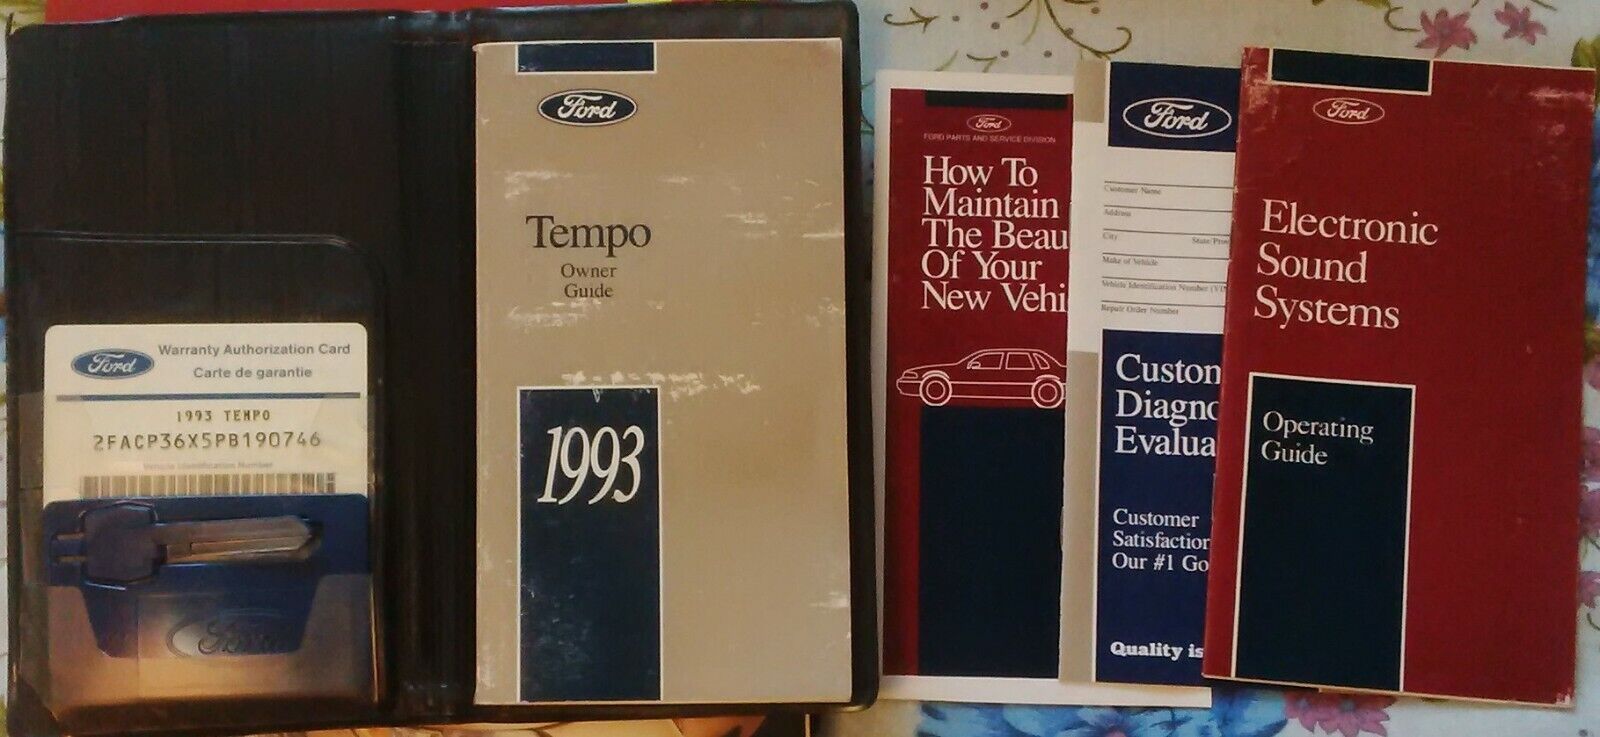 1993 Ford 35% OFF Bargain Tempo Owners Manual